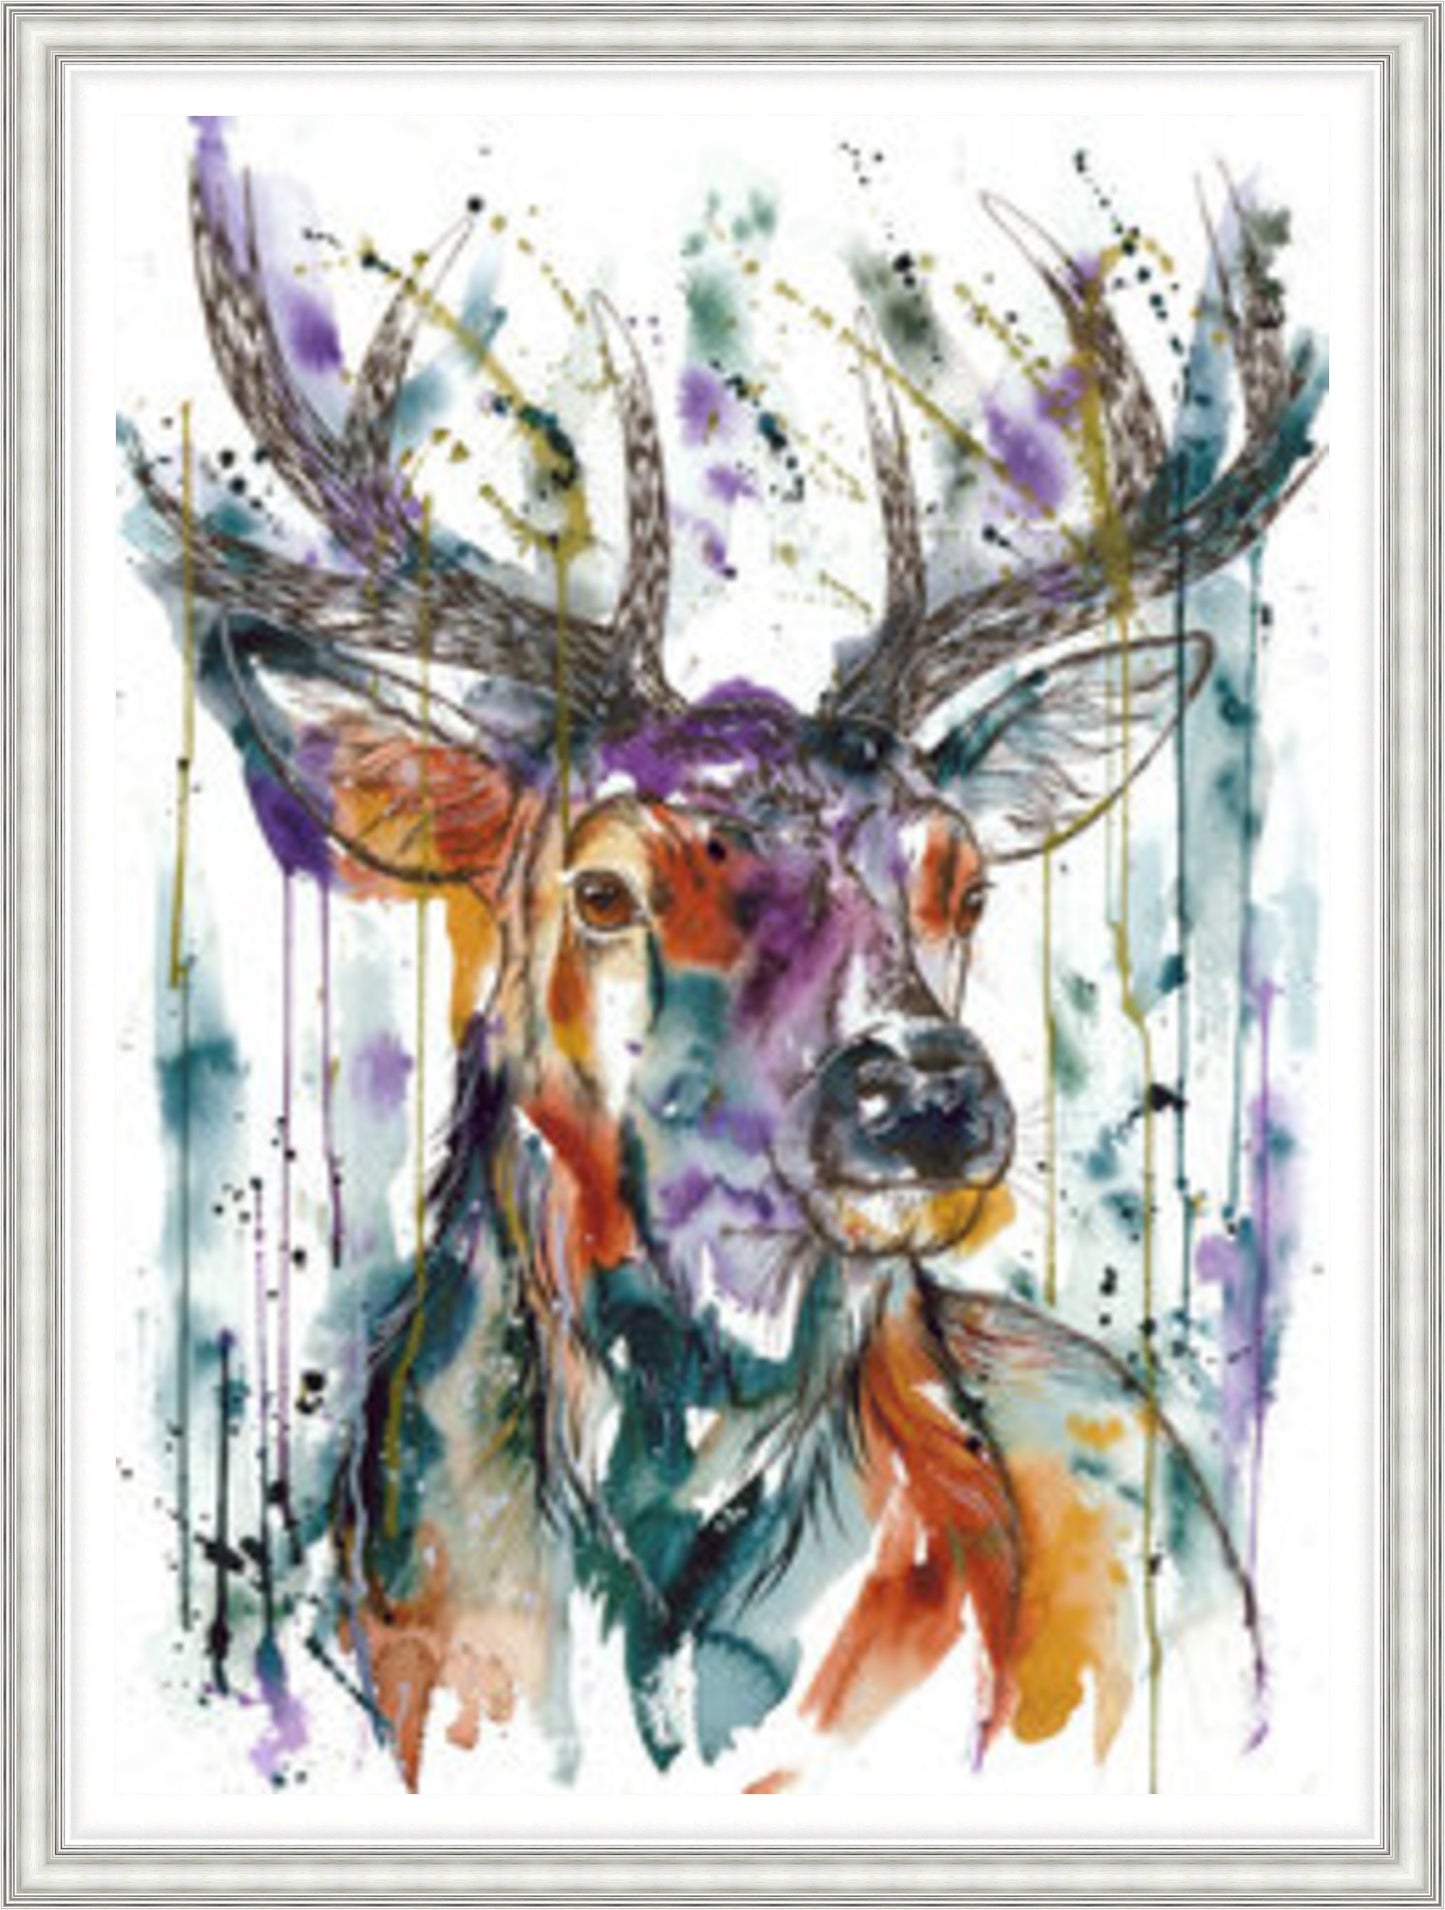 Head of the Highlands Stag Art Print by Tori Ratcliffe